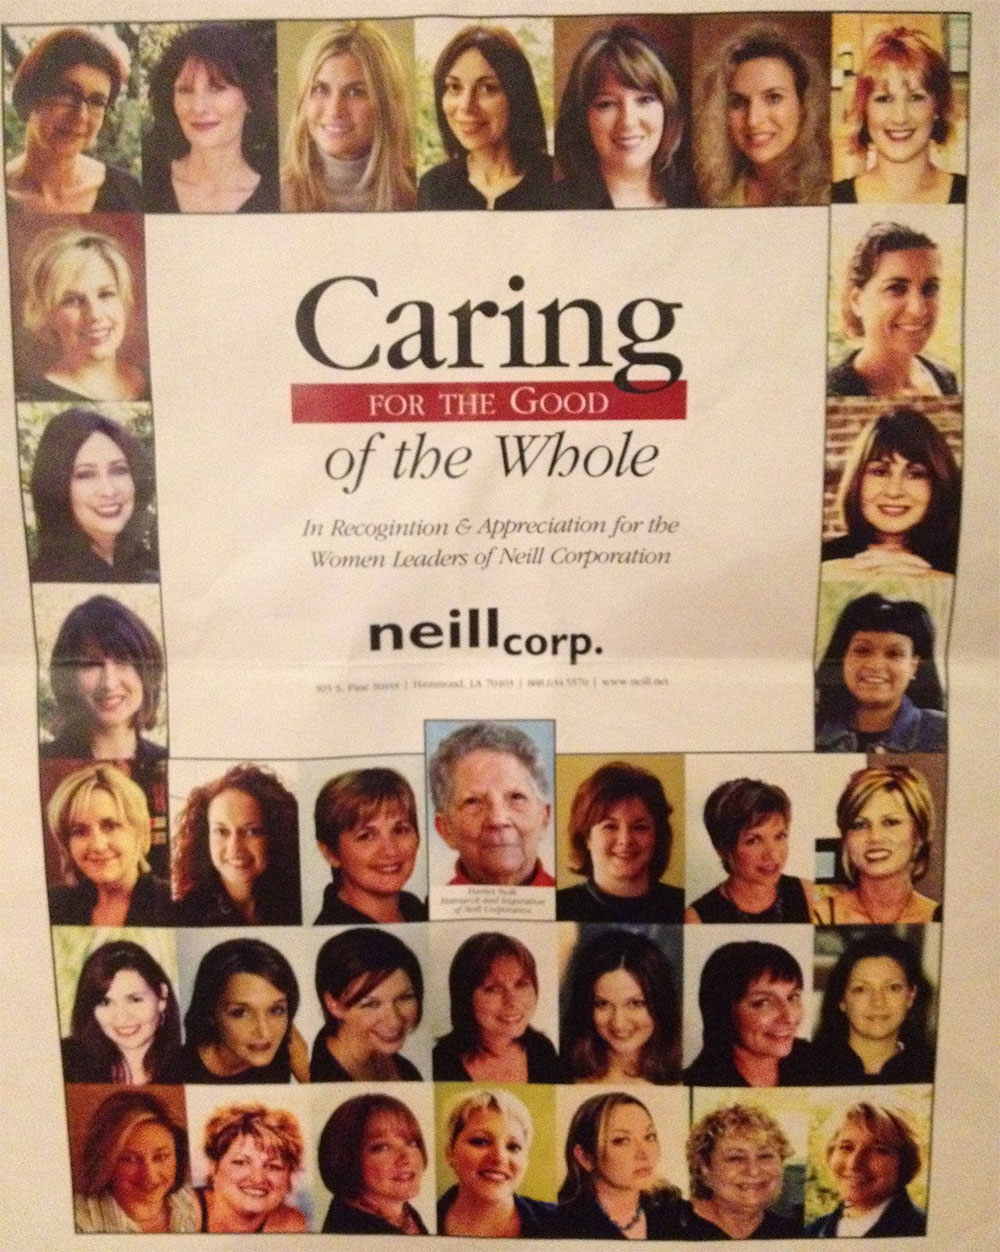 In 2002, Neill Corporation celebrated its women leaders with this tribute ad, produced by Kathleen’s marketing department. (She is shown bottom left). | Source: Kathleen Turpel